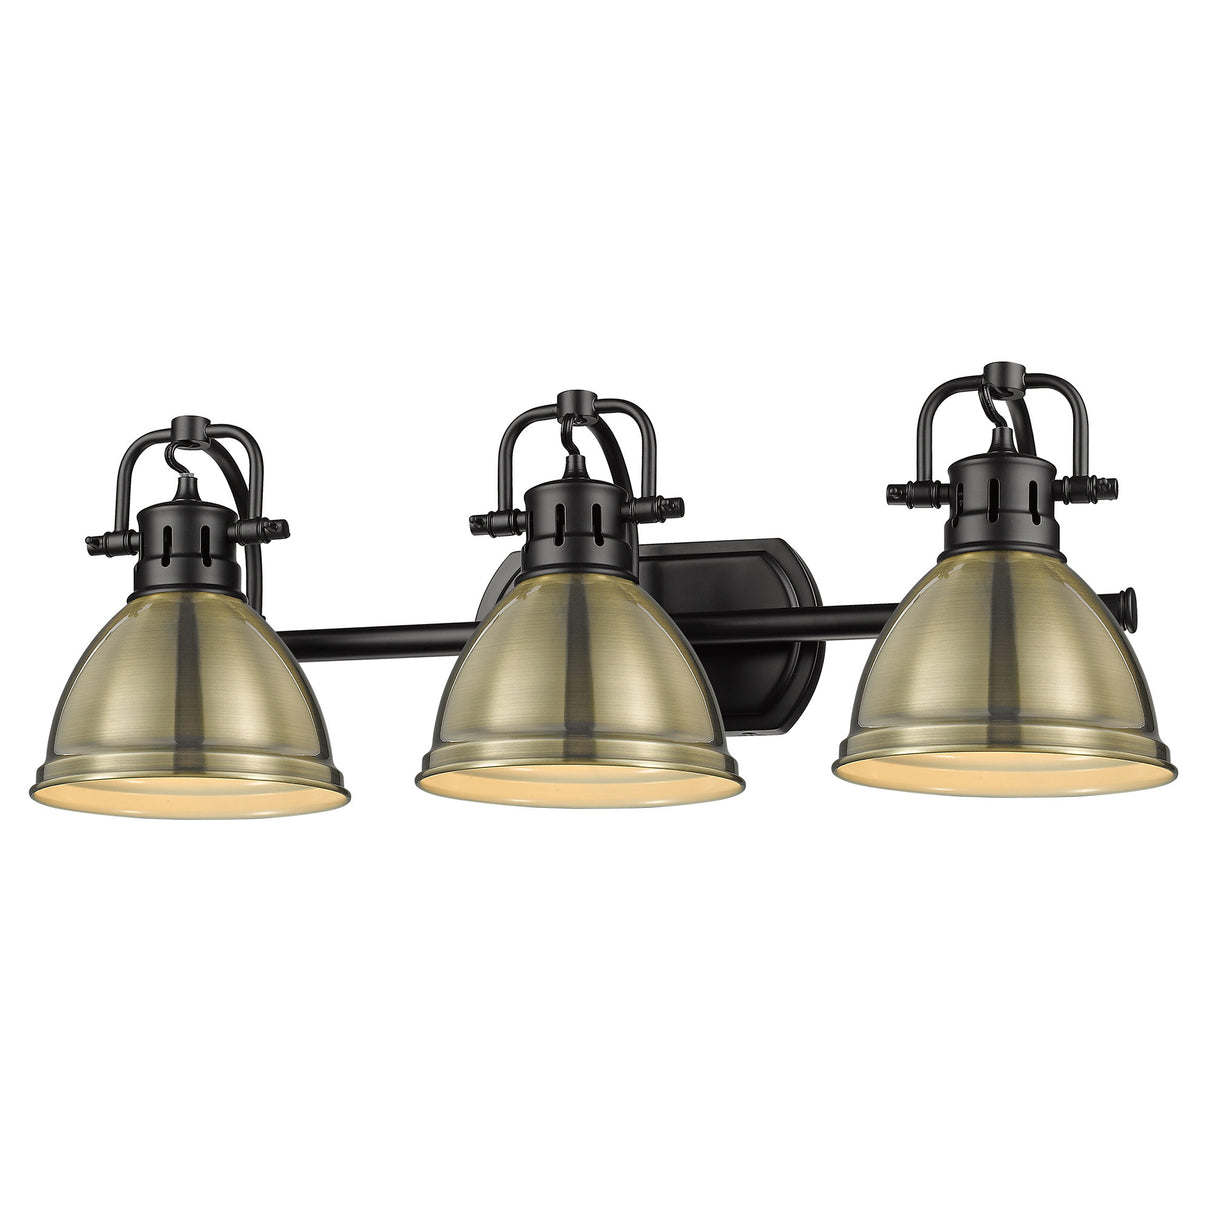 Duncan 3 Light Bath Vanity in Matte Black with an Aged Brass Shade